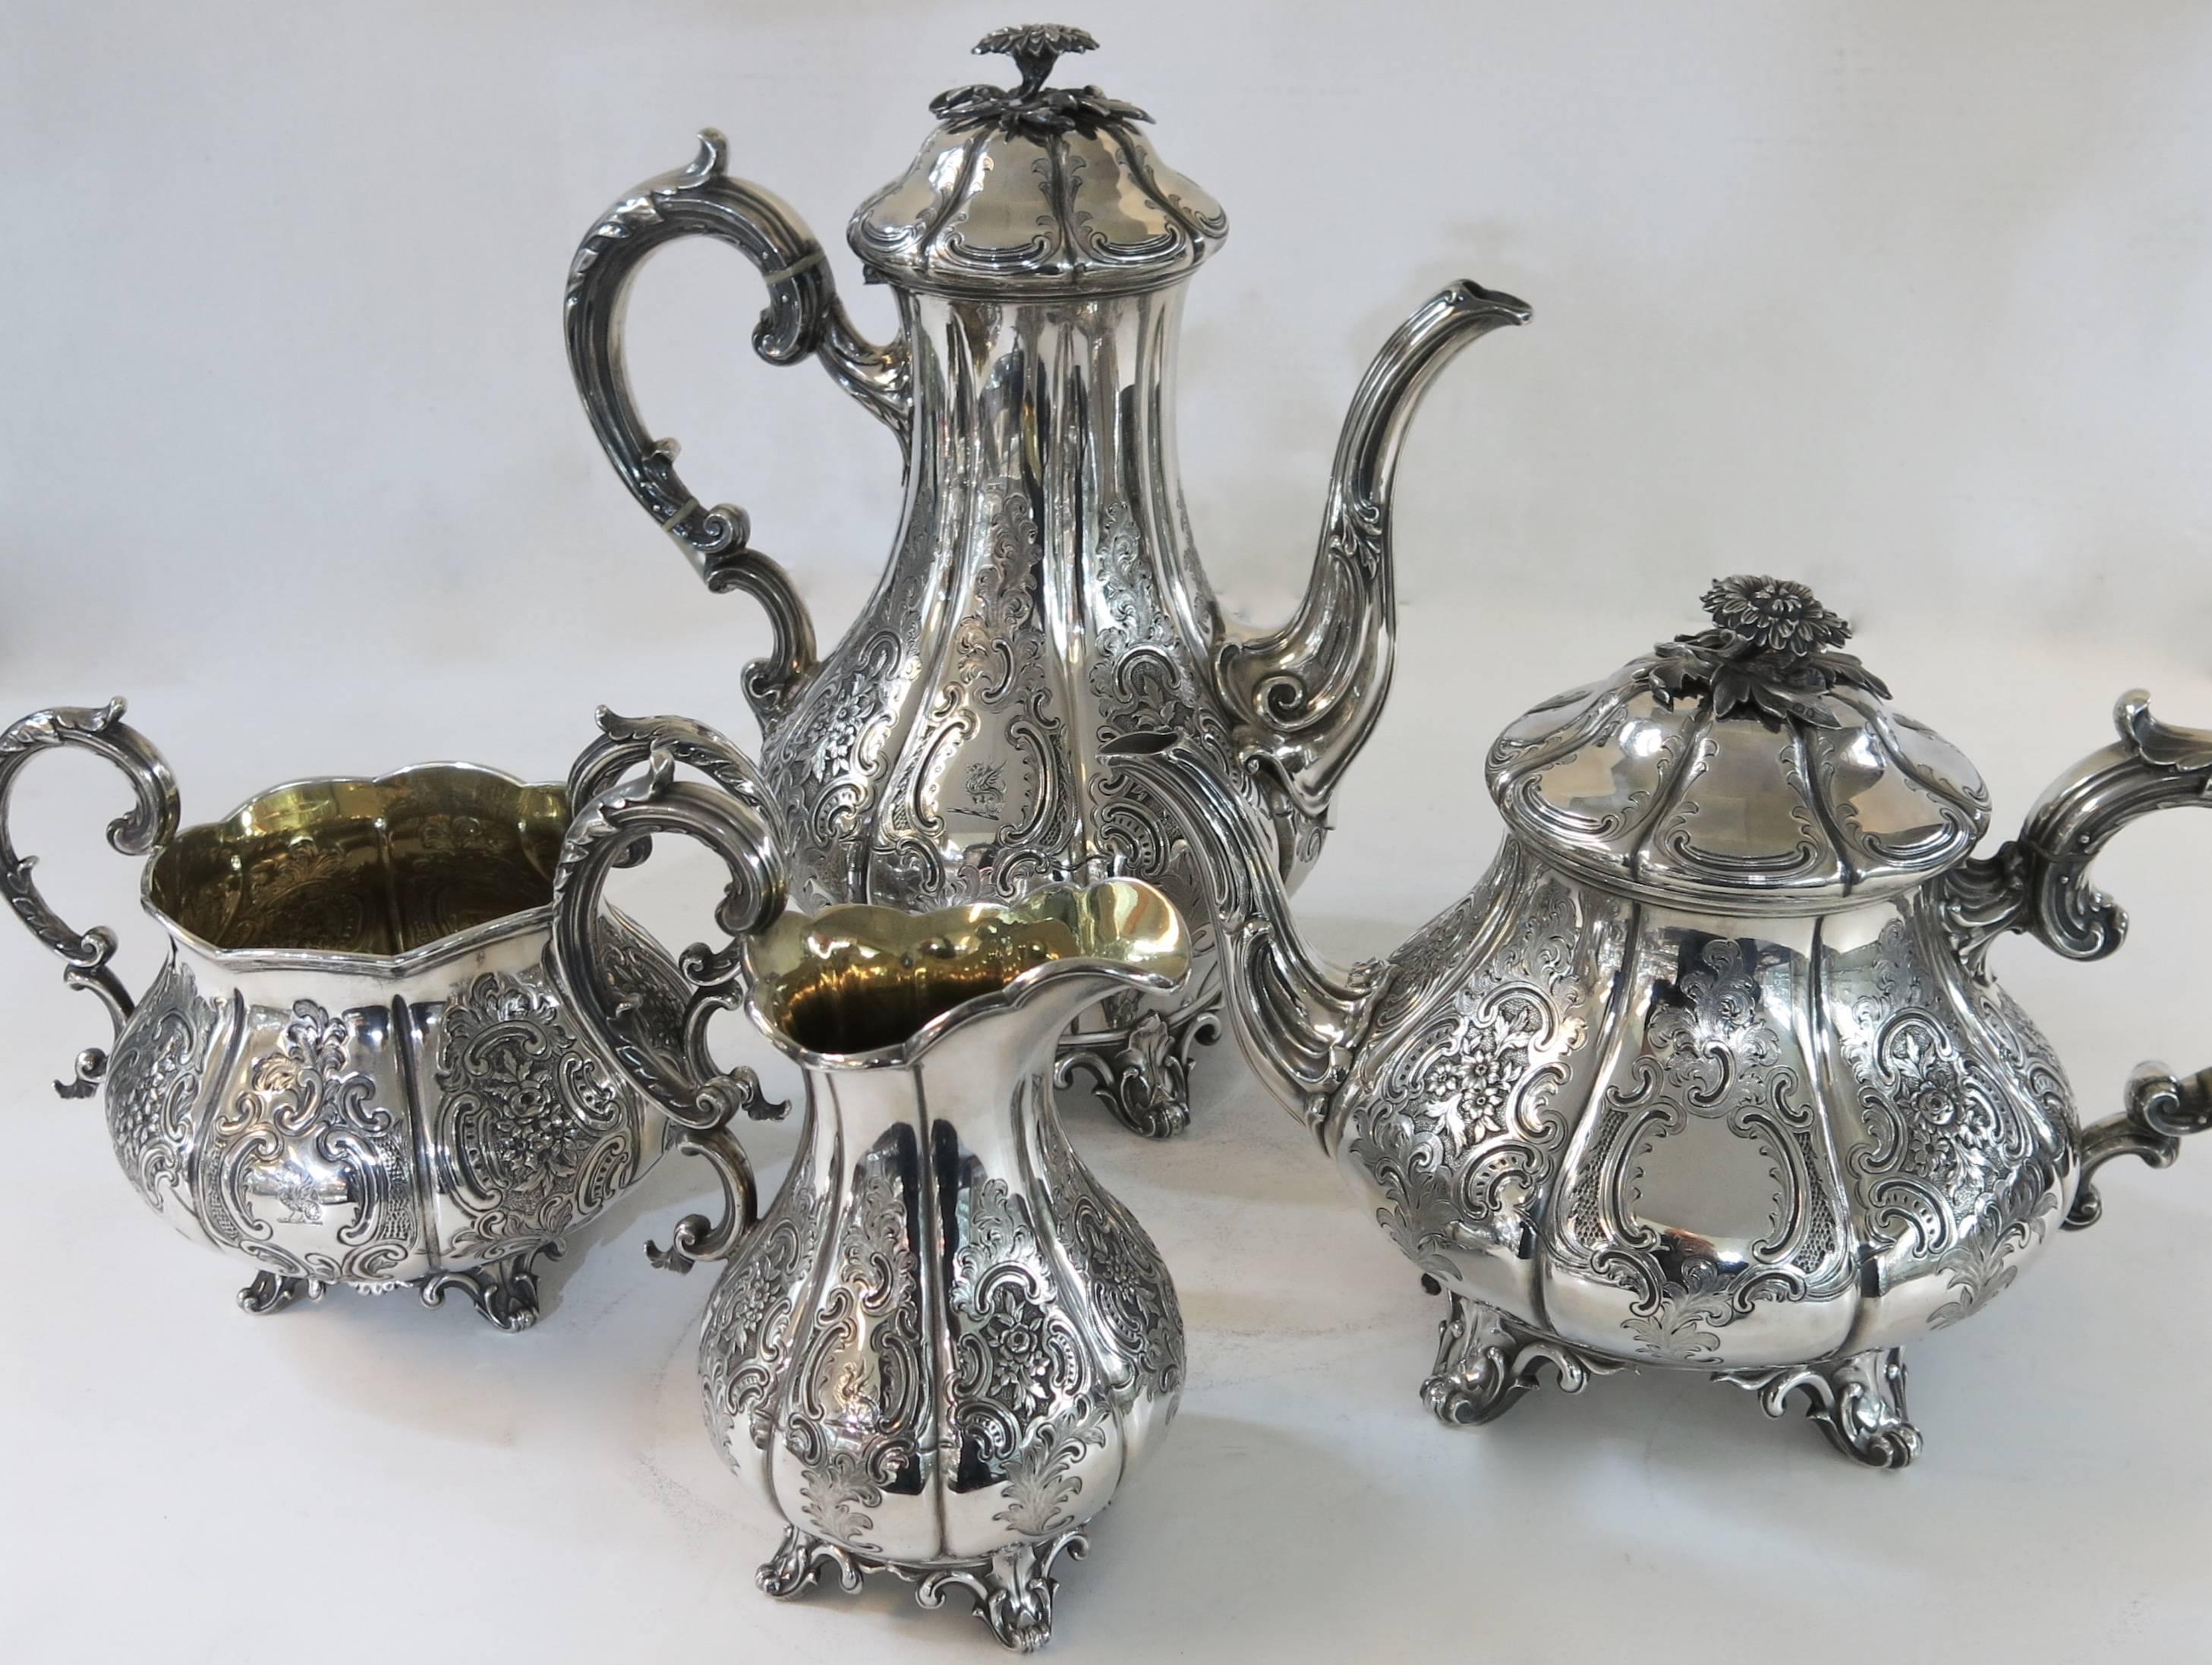 A superb style and quality, four piece, sterling silver tea set. Made in London by the famous silversmith of the Barnard's family, Edward, Edward Jr. John & William Barnards, fully hallmarked and dated 1830. The ribbed bodies with hand chased floral